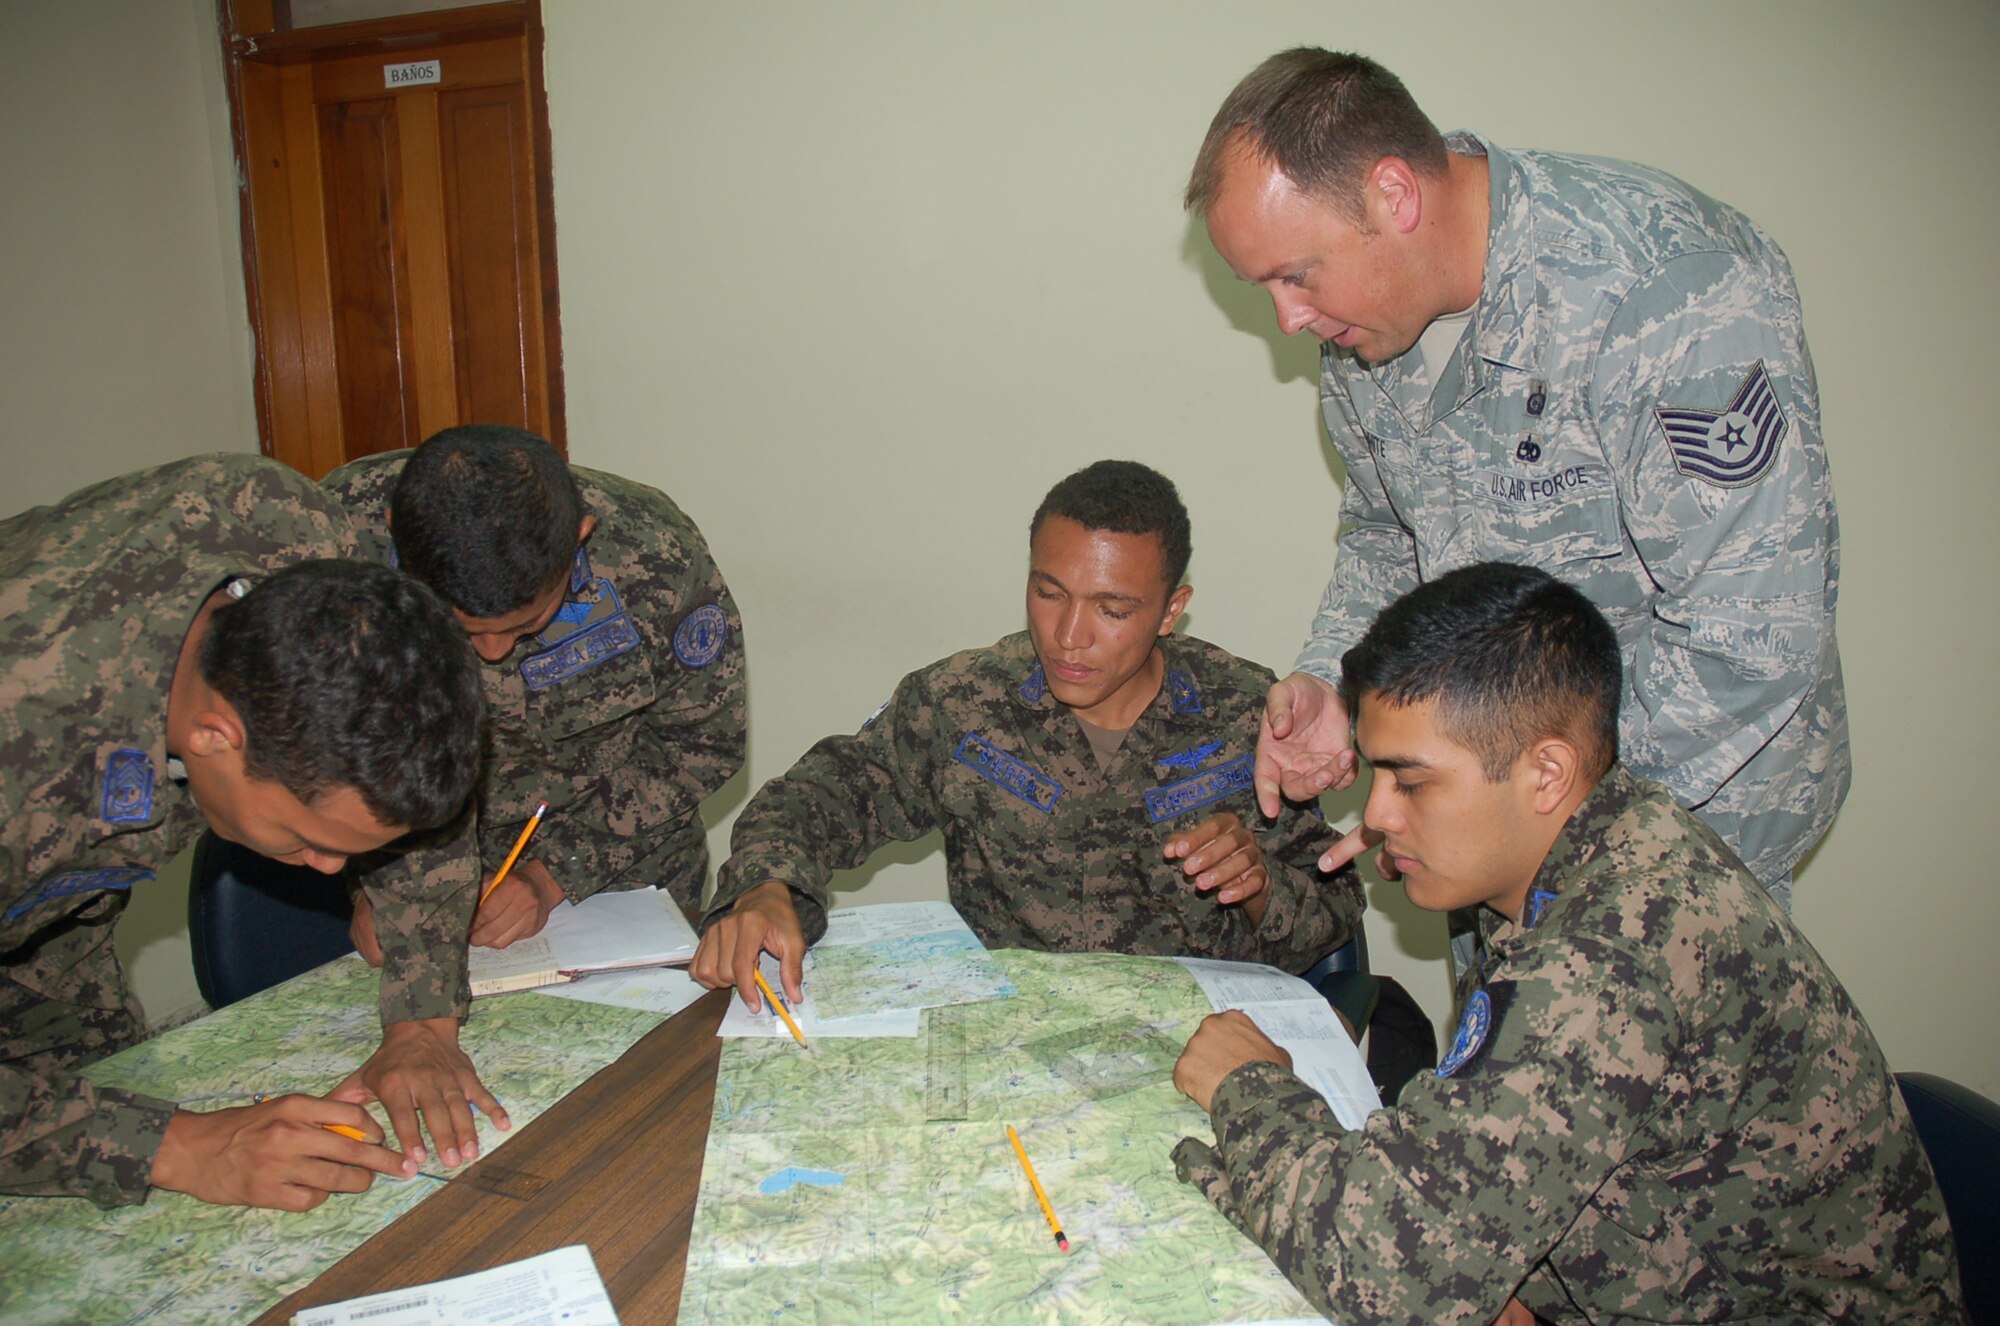 Technical Sgt. Christopher White, 571st Mobility Support Advisory Squadron intelligence air advisor, provides guidance and instruction on plotting points in geographic latitude/longitude and military grid reference system to members of the Honduran Air Force during the MSAS Building Partner Capacity mission, Jul 29 – 24 Aug, at Base Aerea Hector Acosta Mejia, Tegucigalpa, Honduras. (U.S. Air Force photo by Major Lorena Tejada)